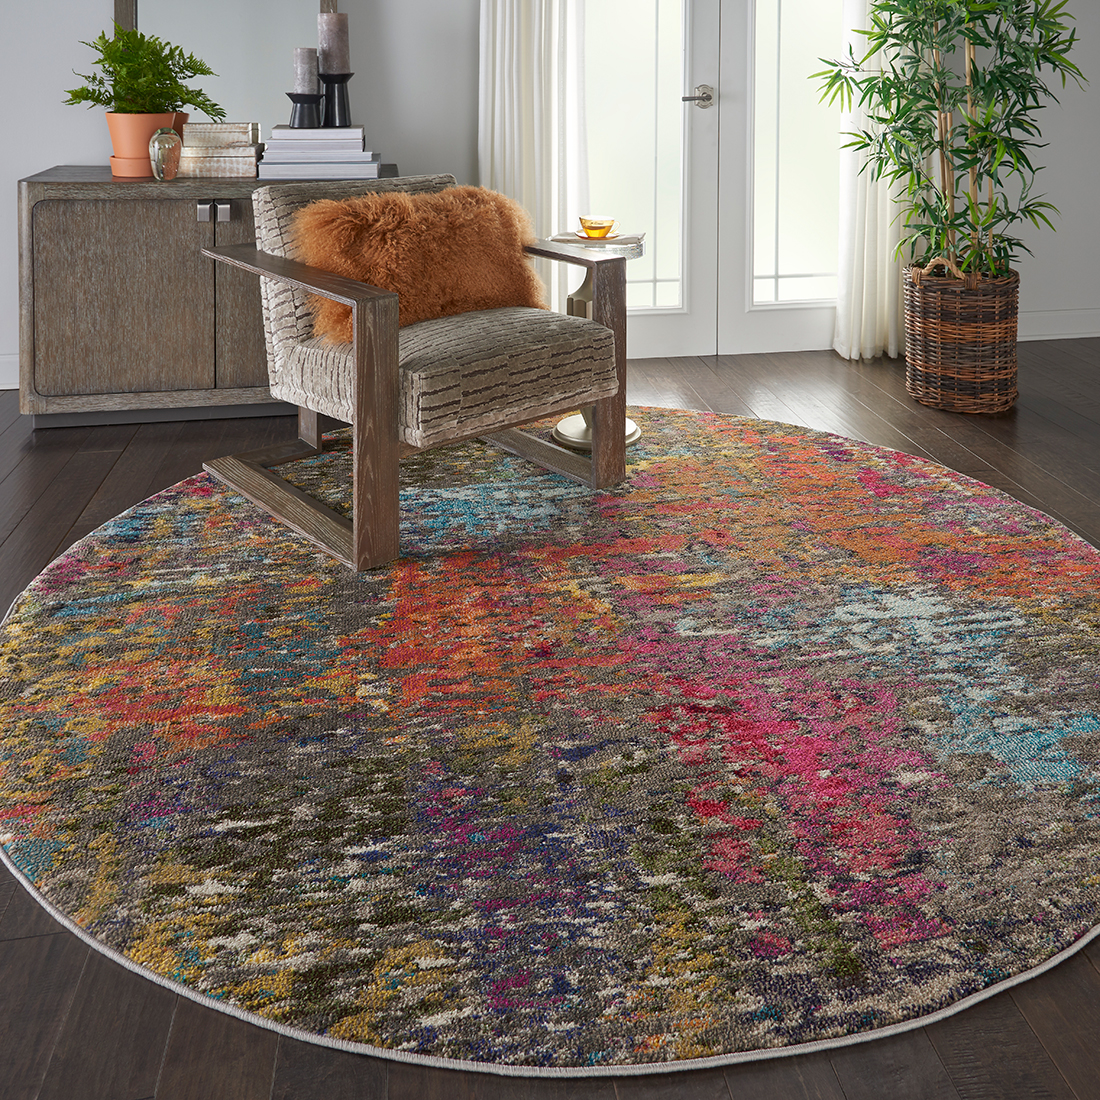 Nourison Rugs Celestial Round Rug - 2.39m x 2.39m in Sunset